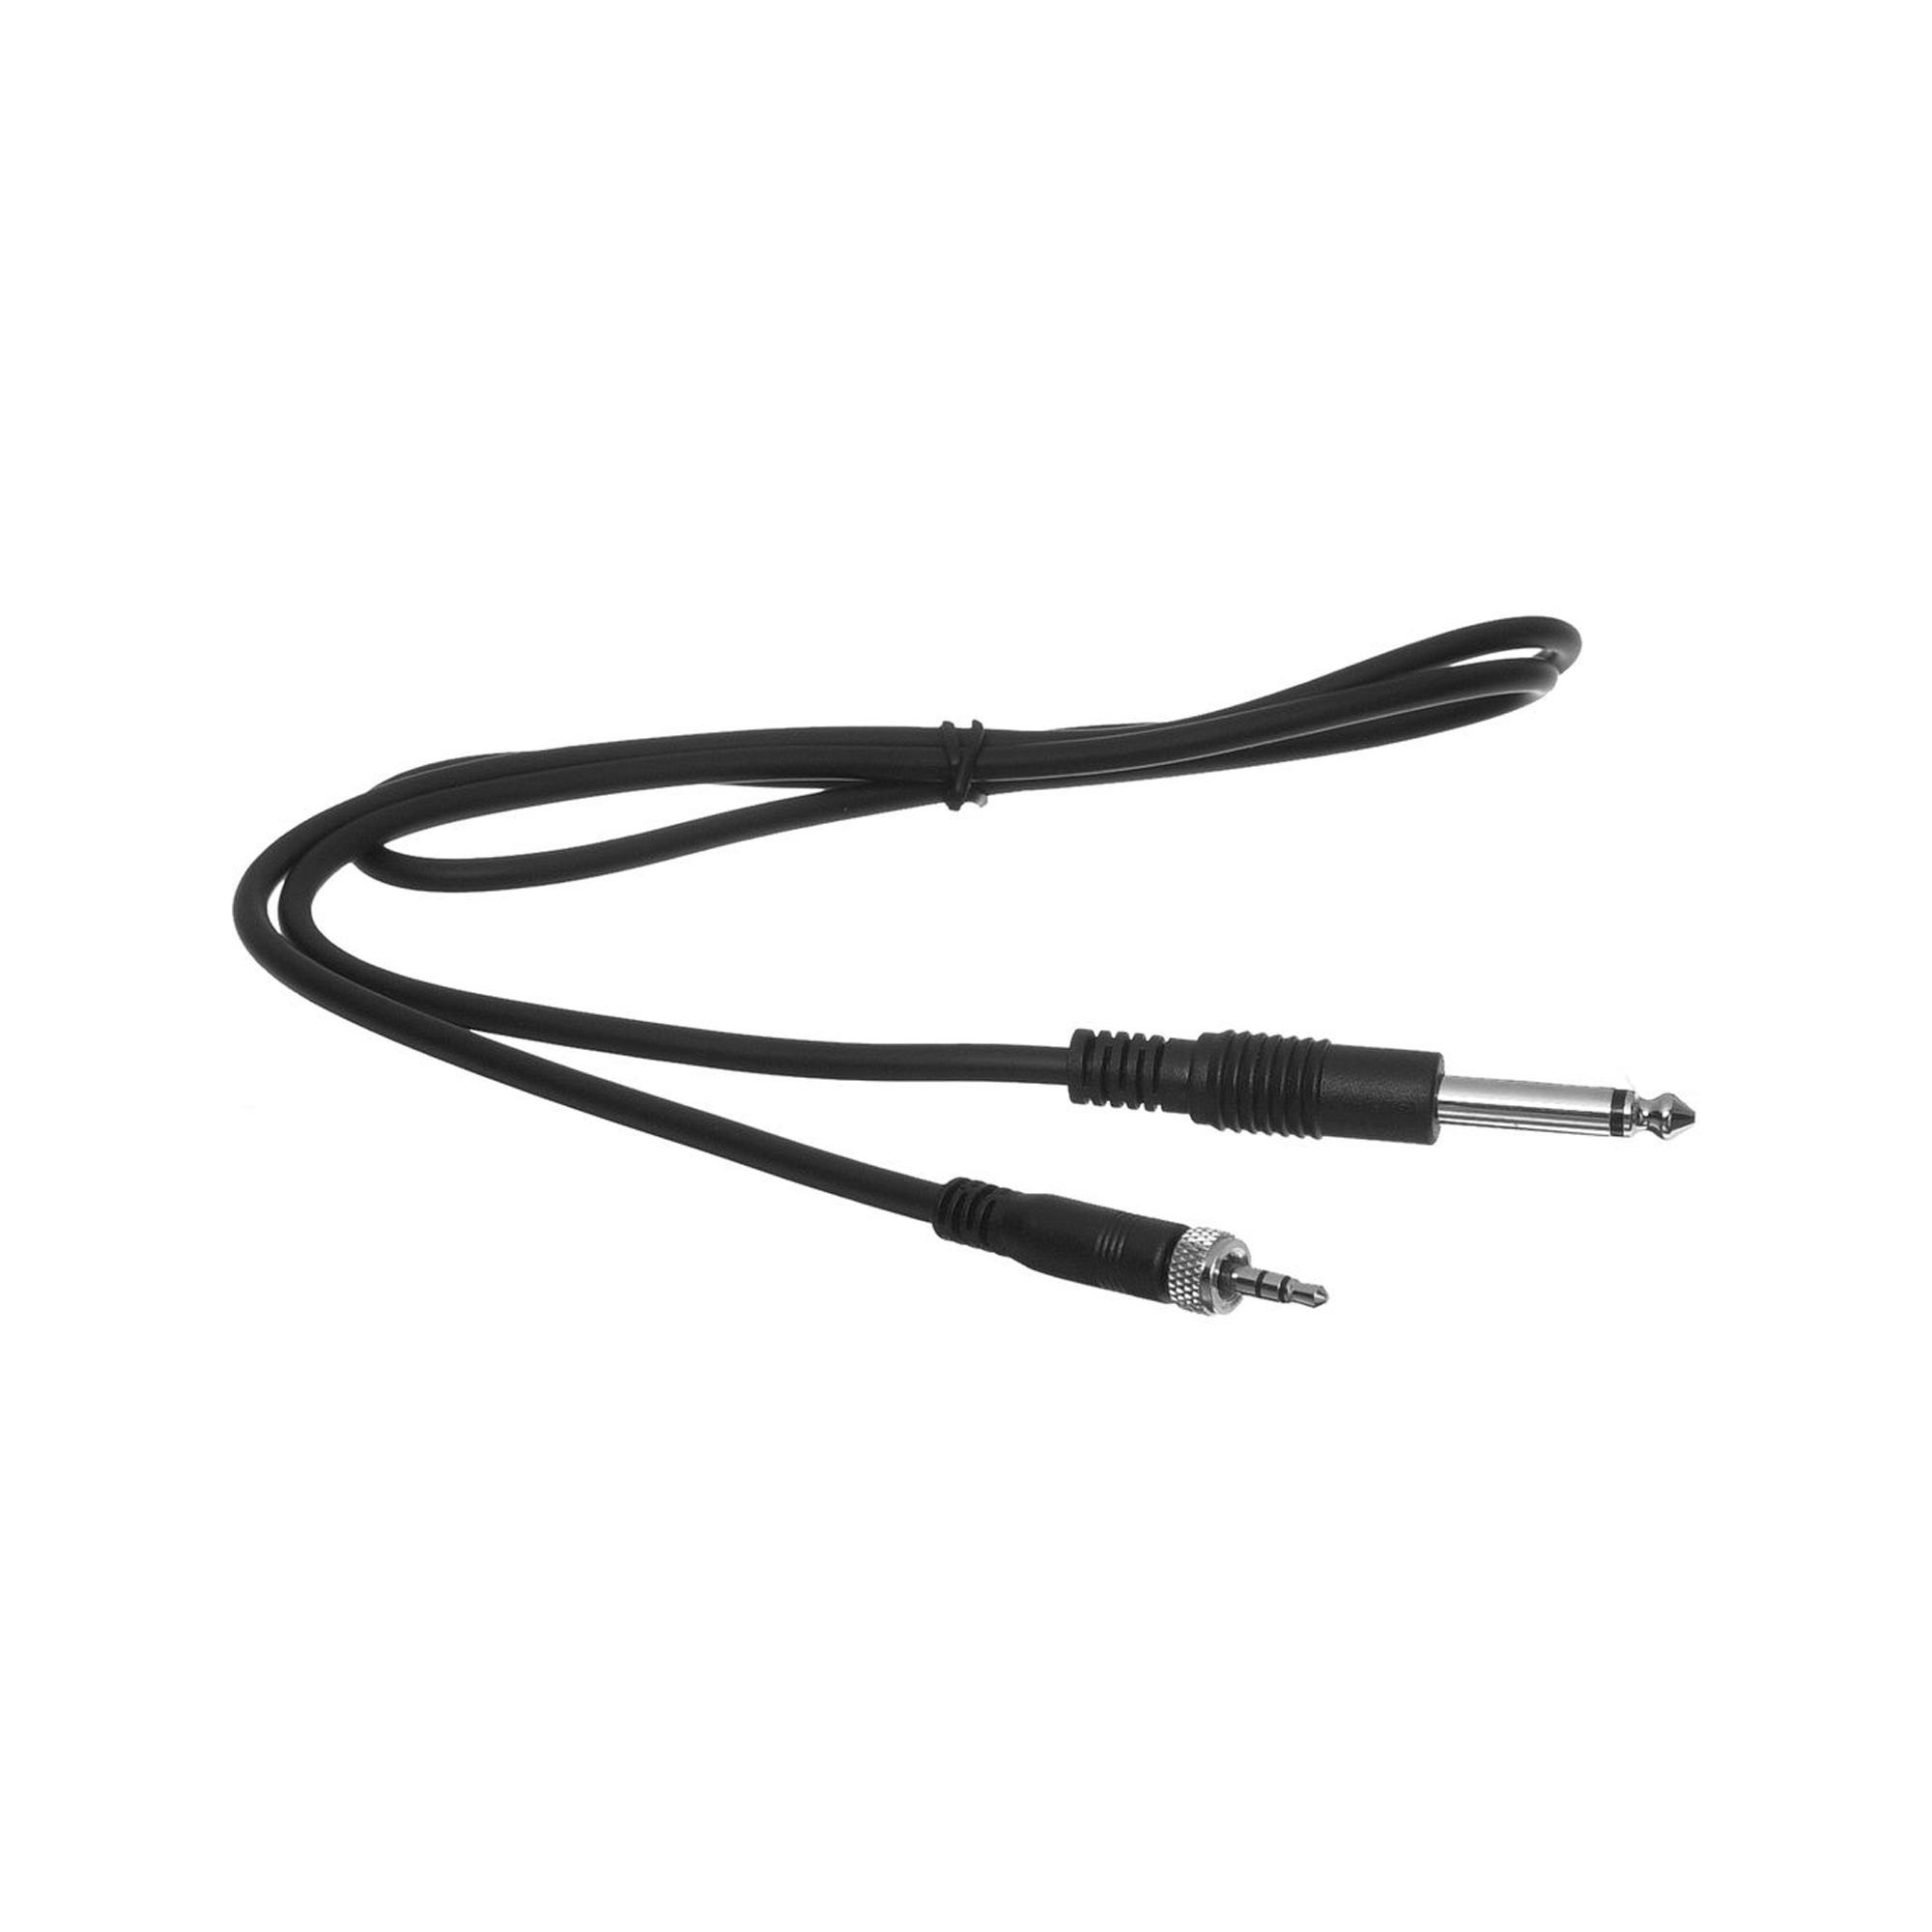 Sennheiser CI 1 Locking 3.5mm to 1/4" Instrument Cable For Bodypack Transmitters